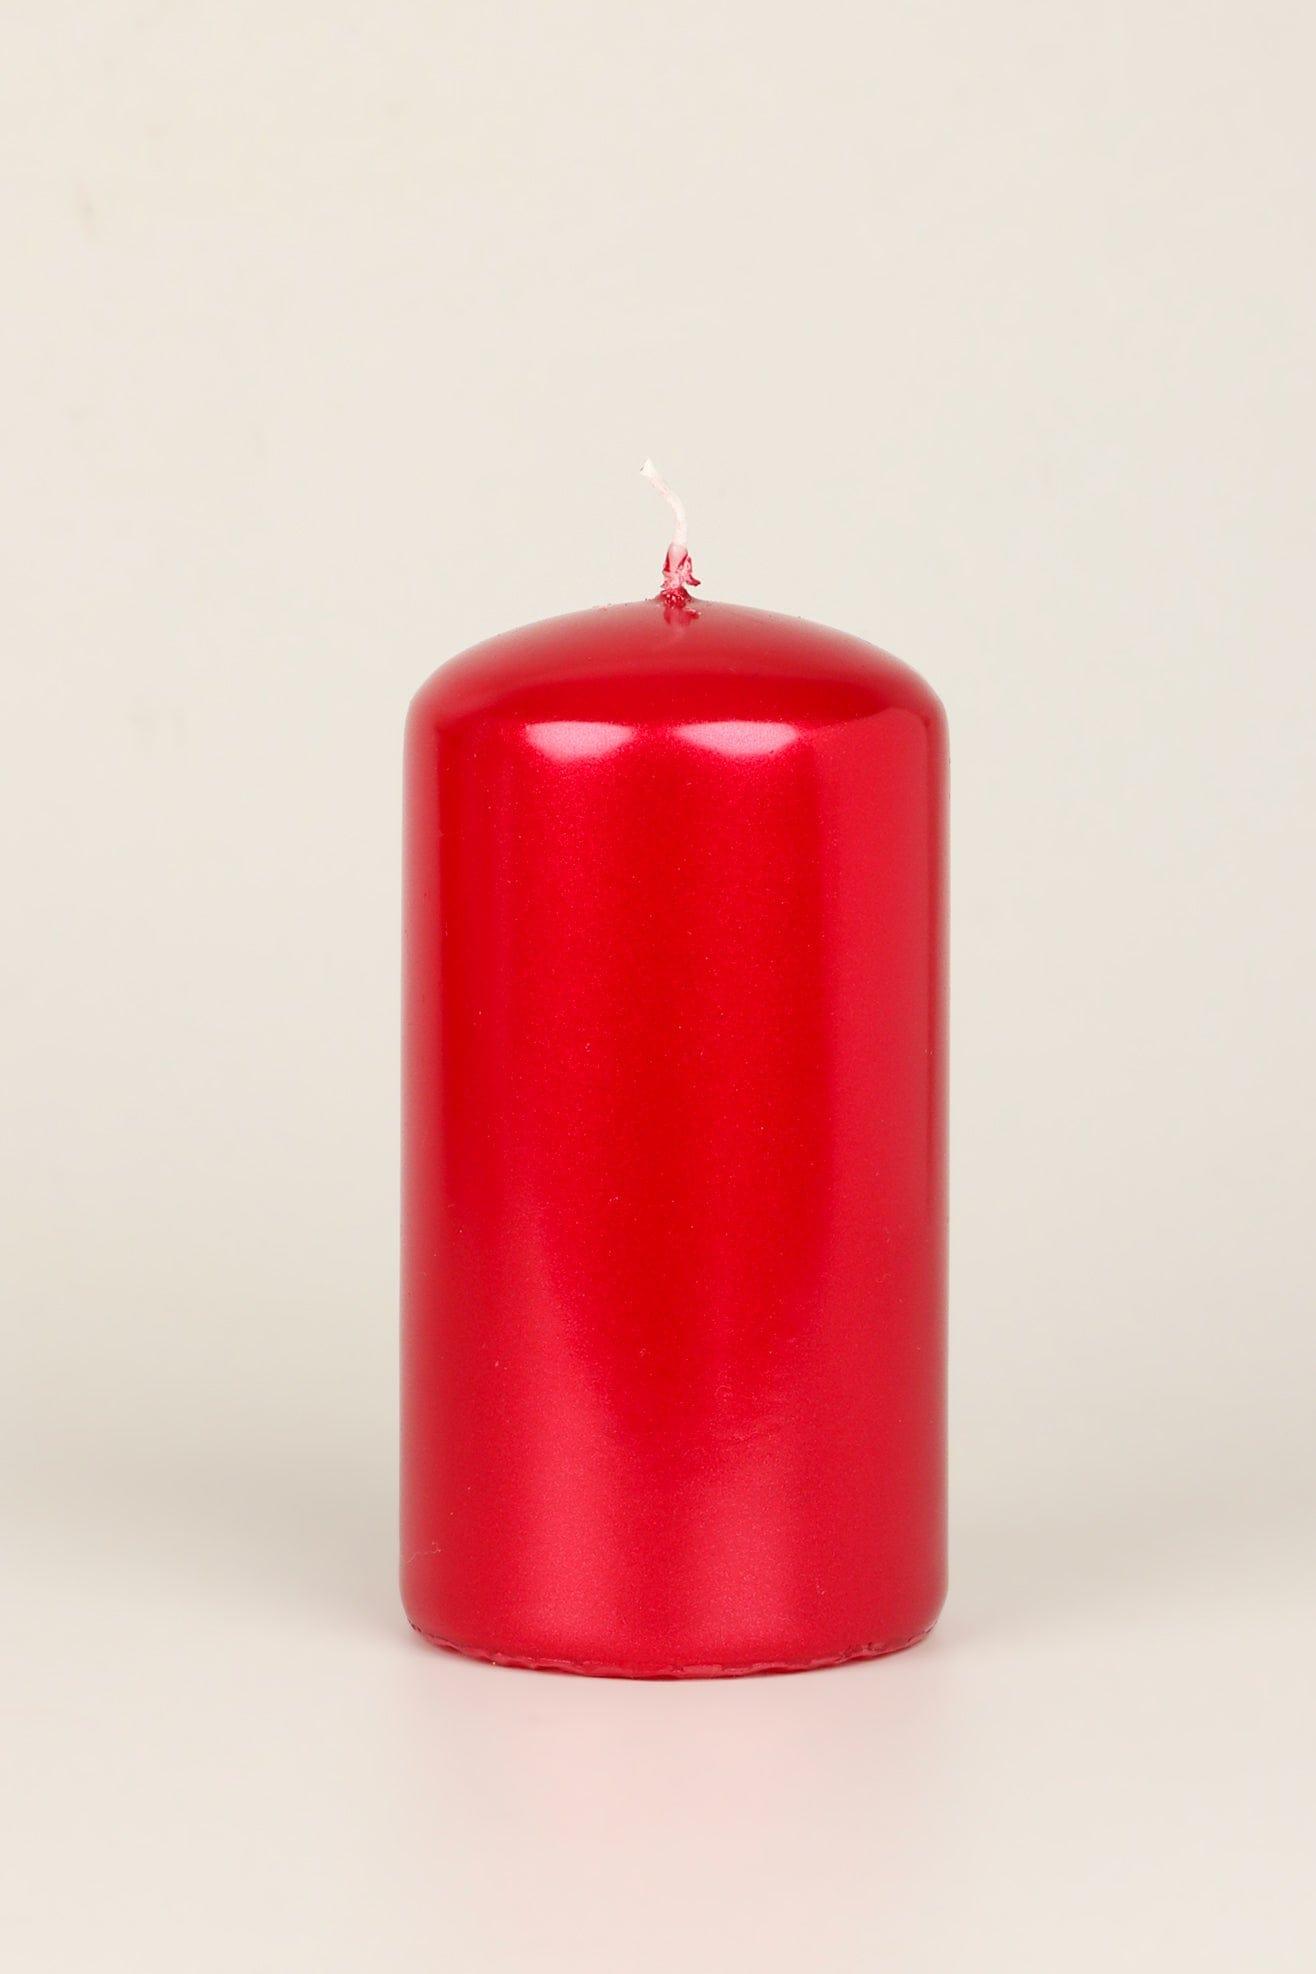 G Decor Candles & Candle Holders Red / Small Pillar Grace Scarlet Red Varnished Shimmer Metallic Shine Pillar Candle